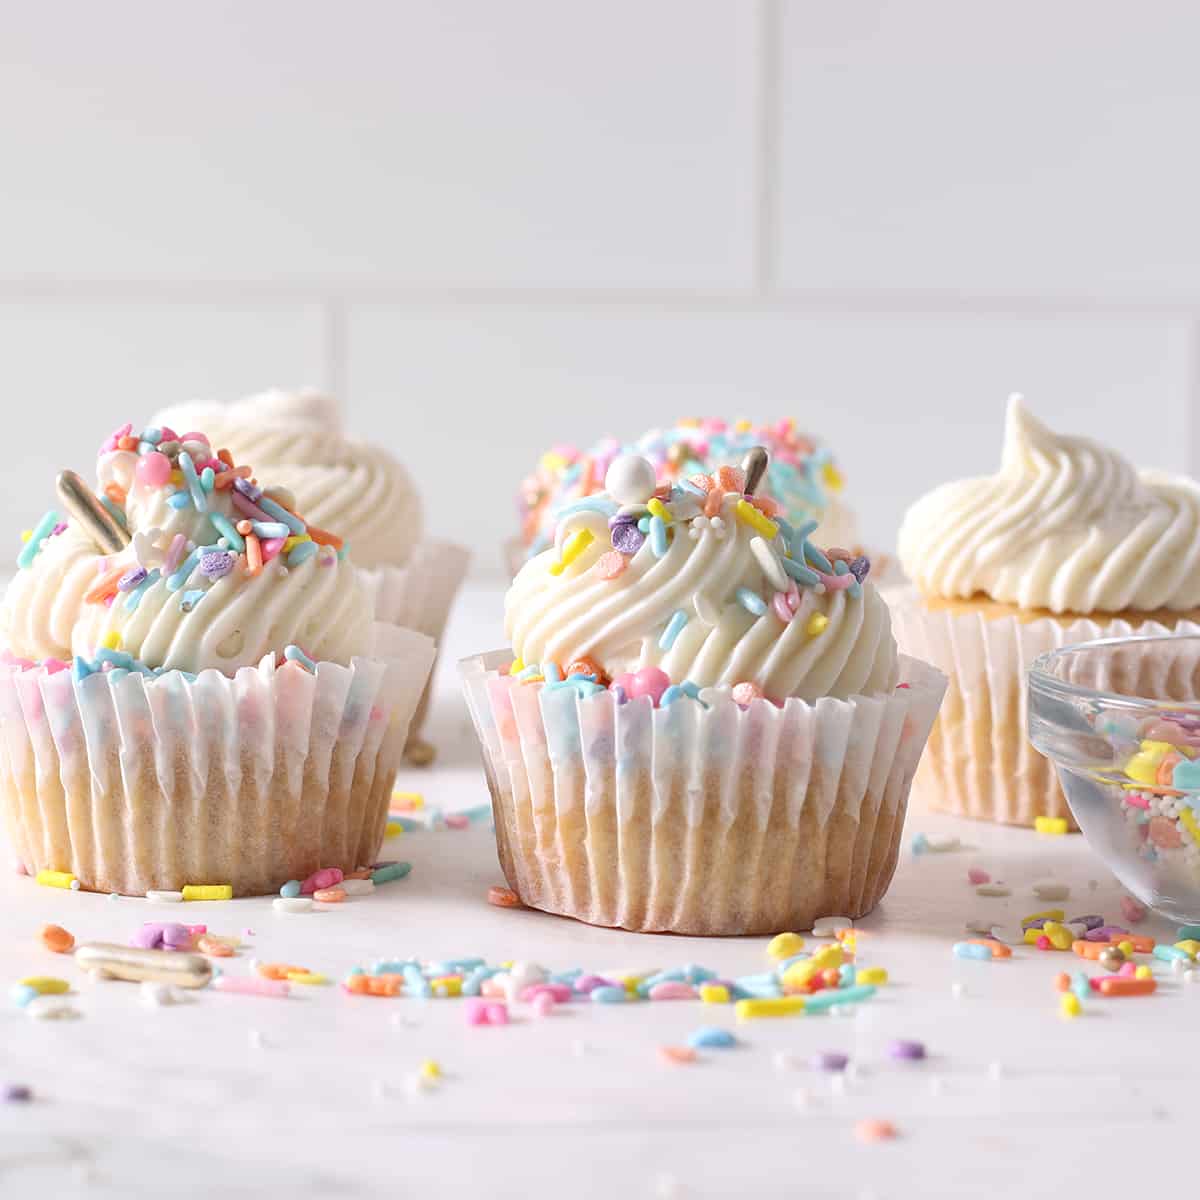 a row of frosted and sprinkled cupcakes